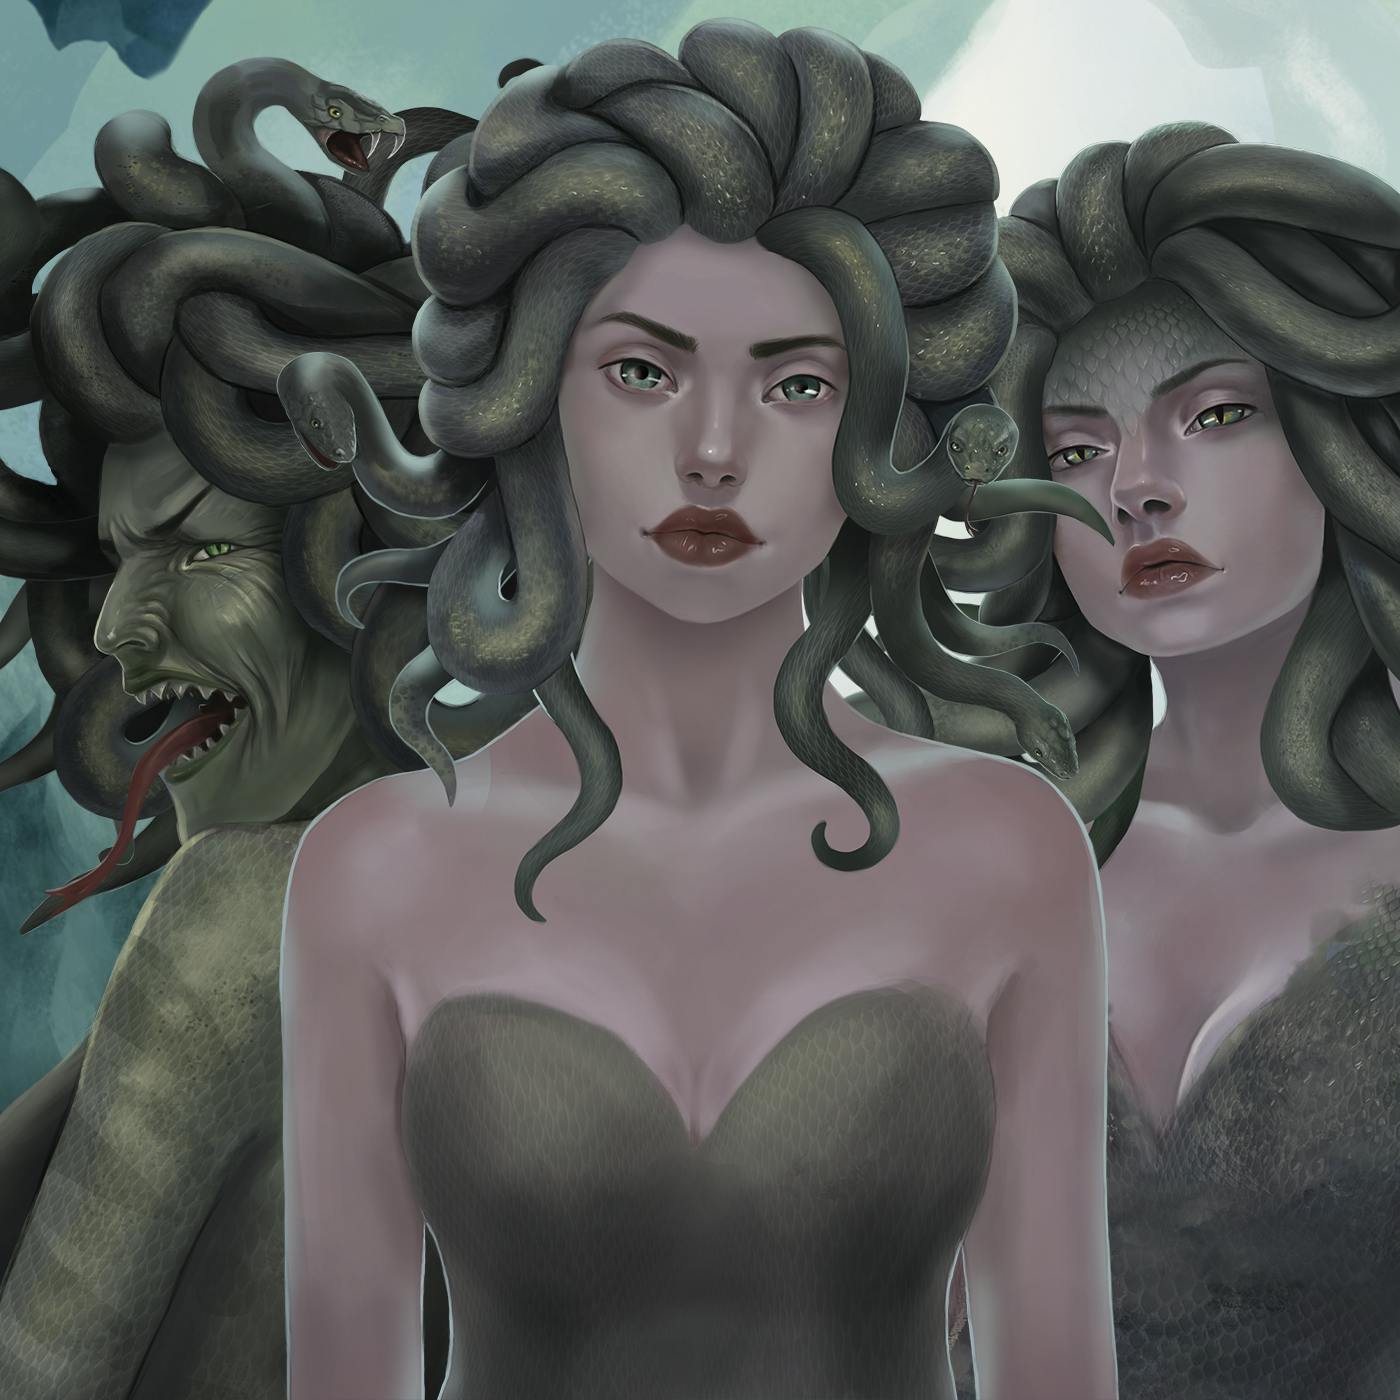 Episode 4: The Many Faces of Medusa - Monster, Victim or Protector?